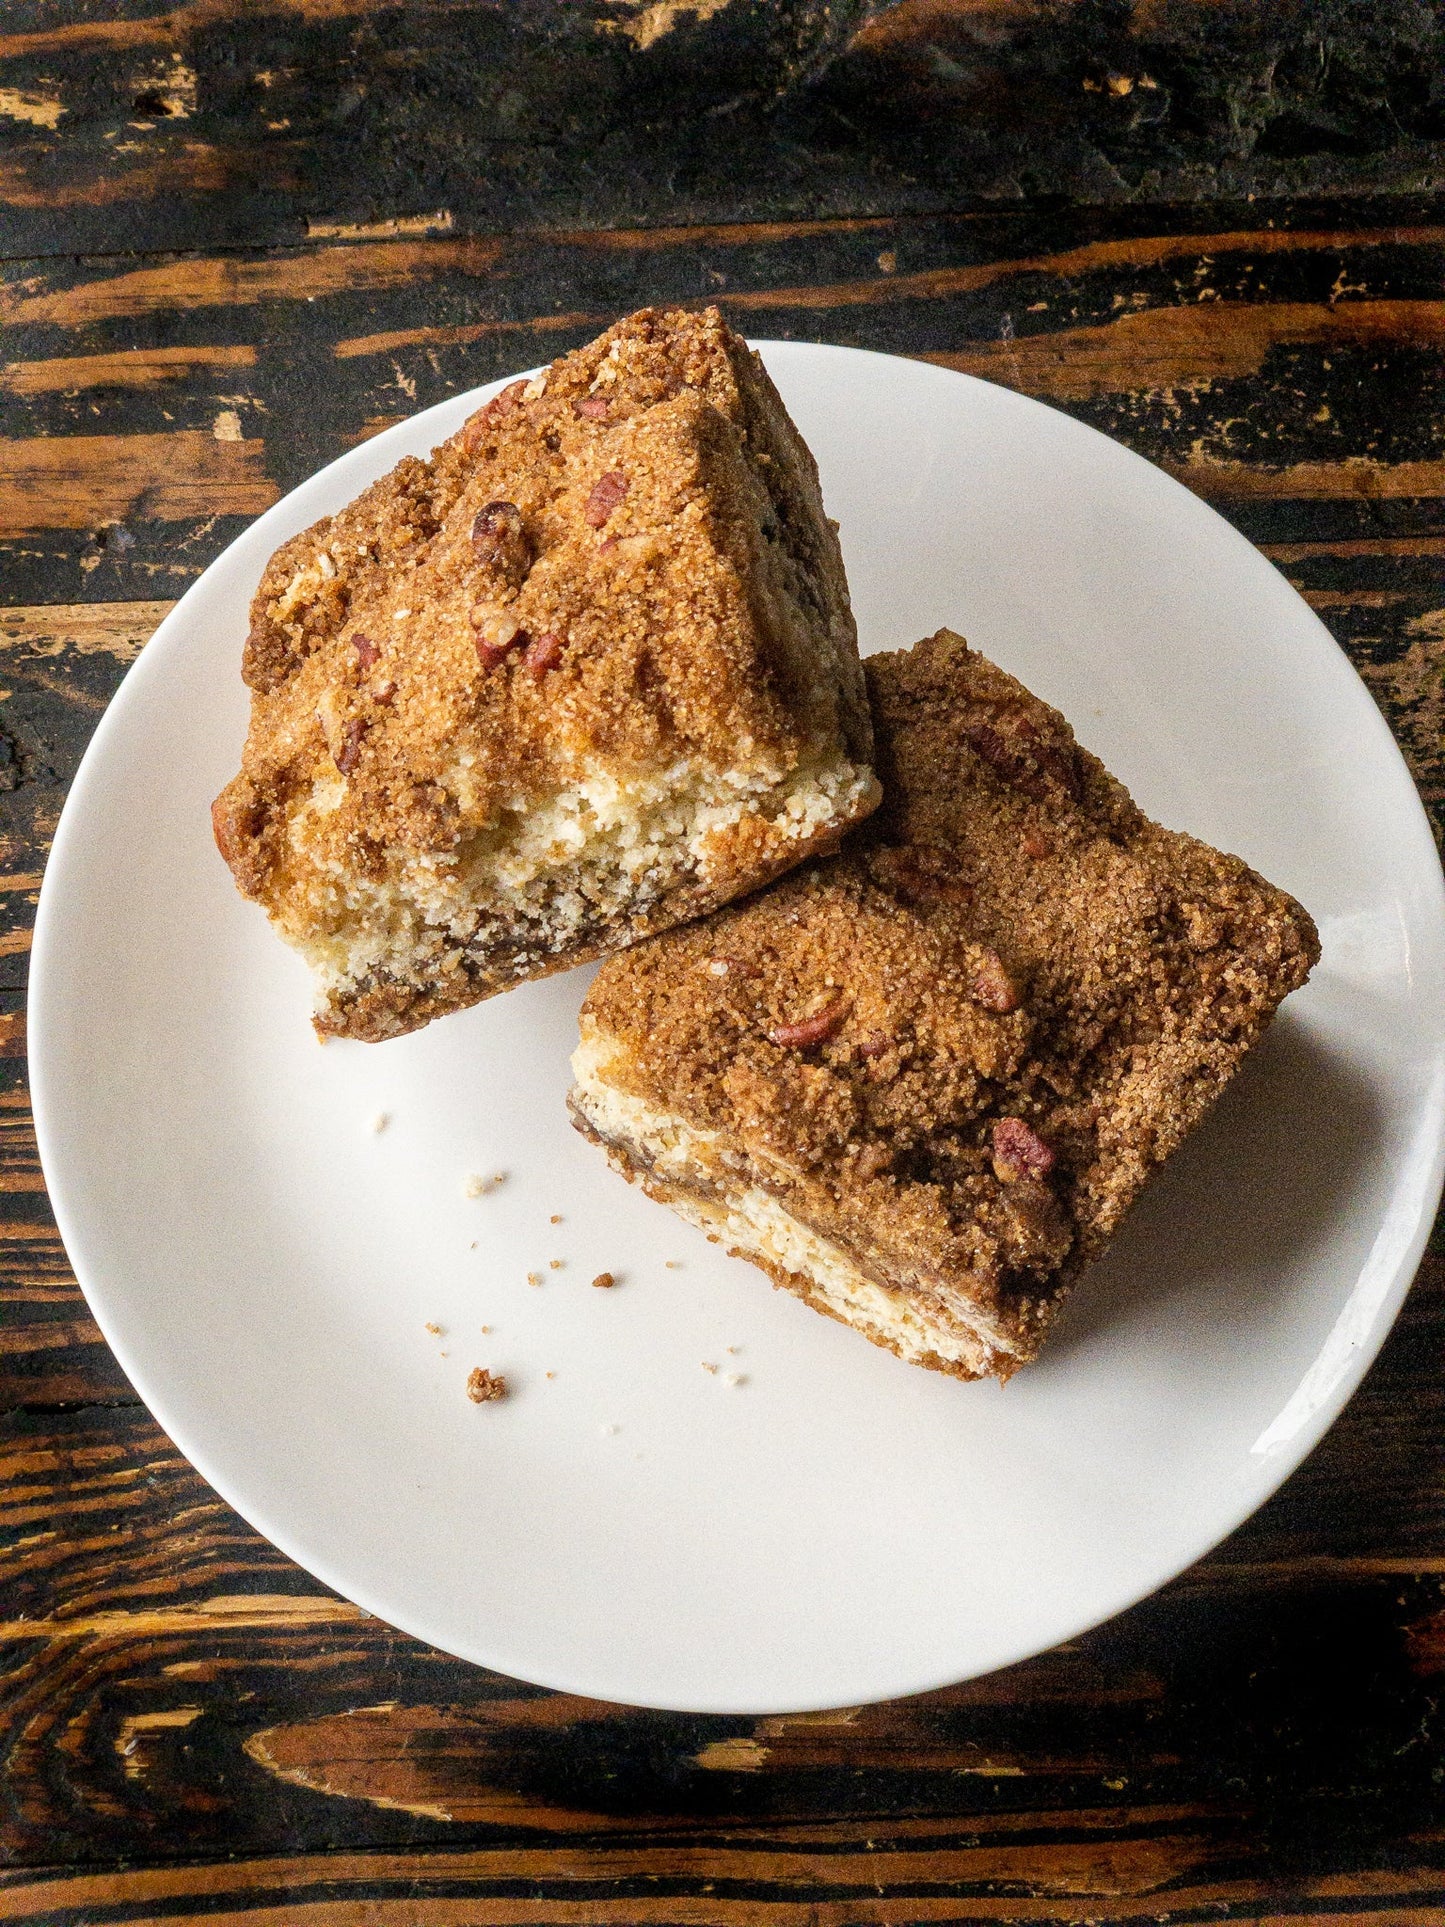 Famous Pecan Coffee Cake Baked Goods - The Meeting Place on Market